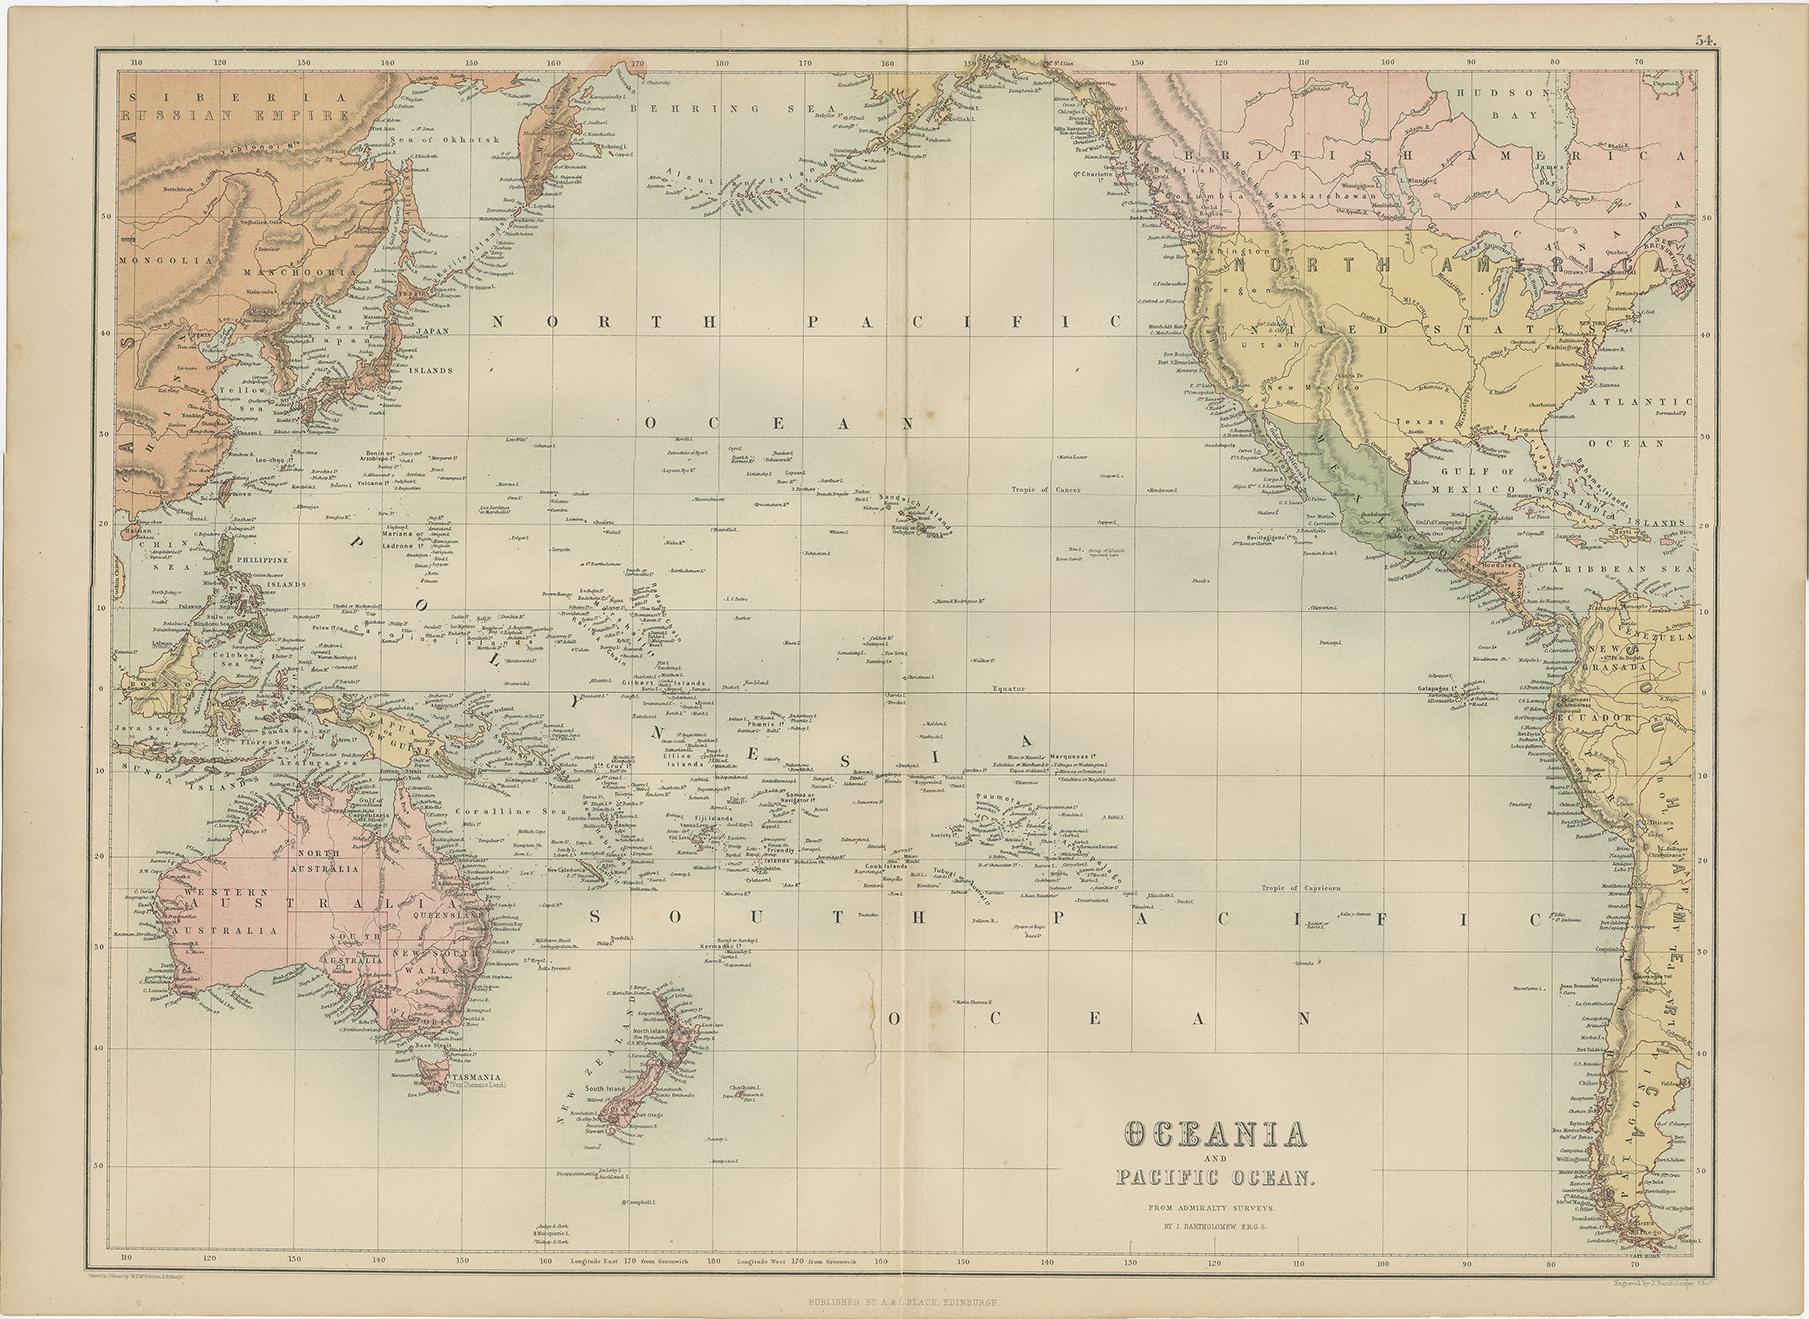 19th Century Antique Map of Oceania and the Pacific Ocean by A & C. Black, 1870